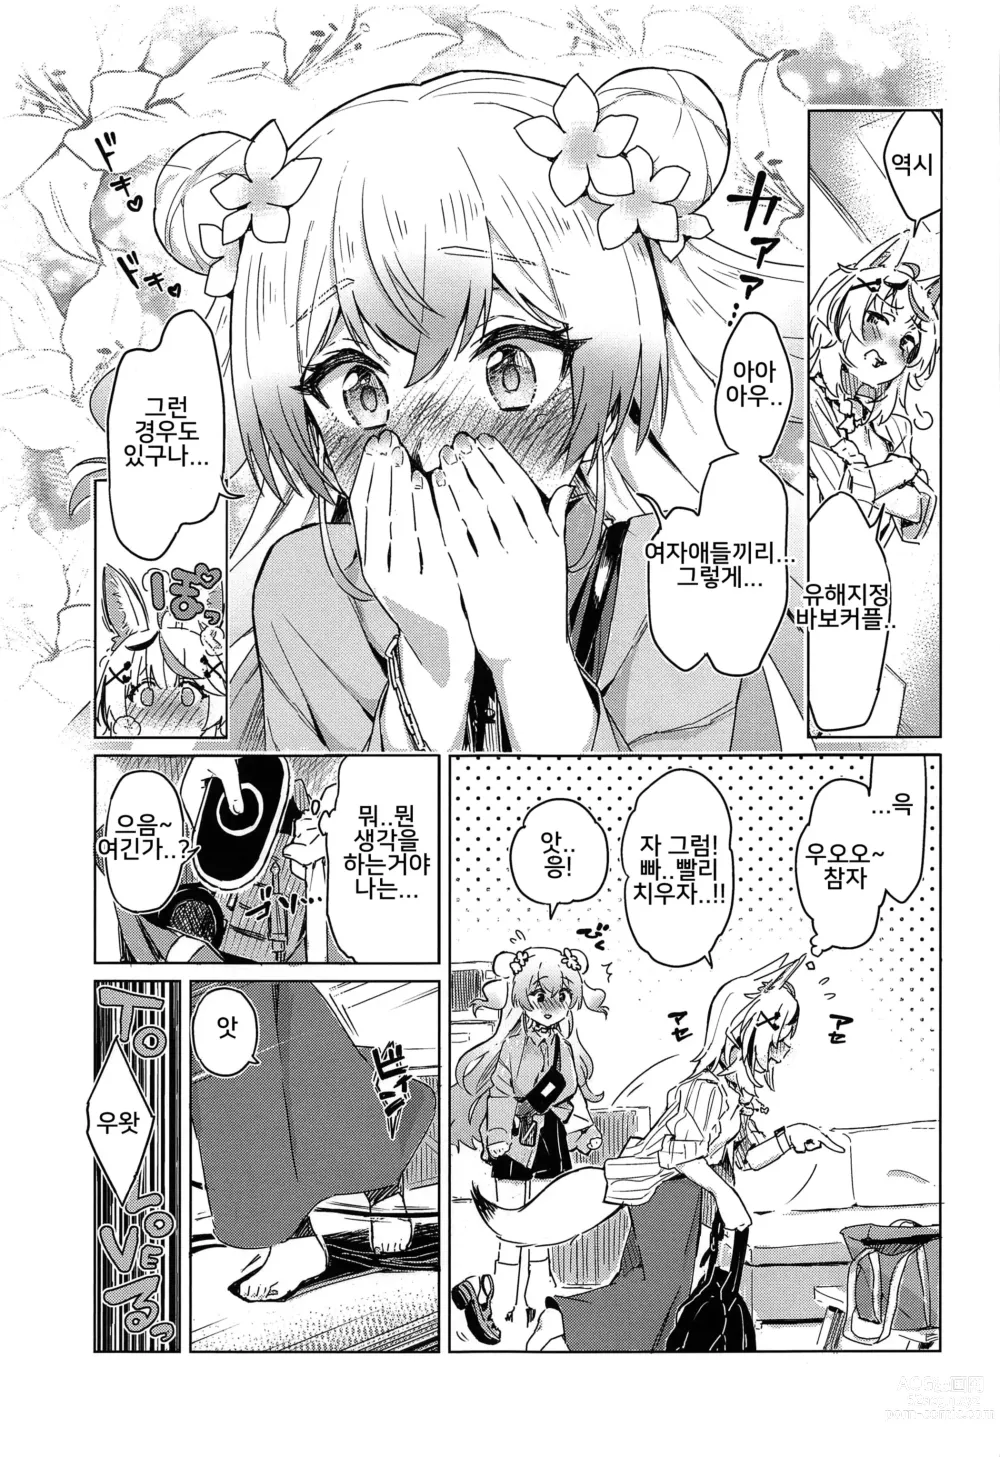 Page 10 of doujinshi Fennec wa Iseijin no Yume o Miru ka - Does The Fennec Dream of The Lovely Visitor?